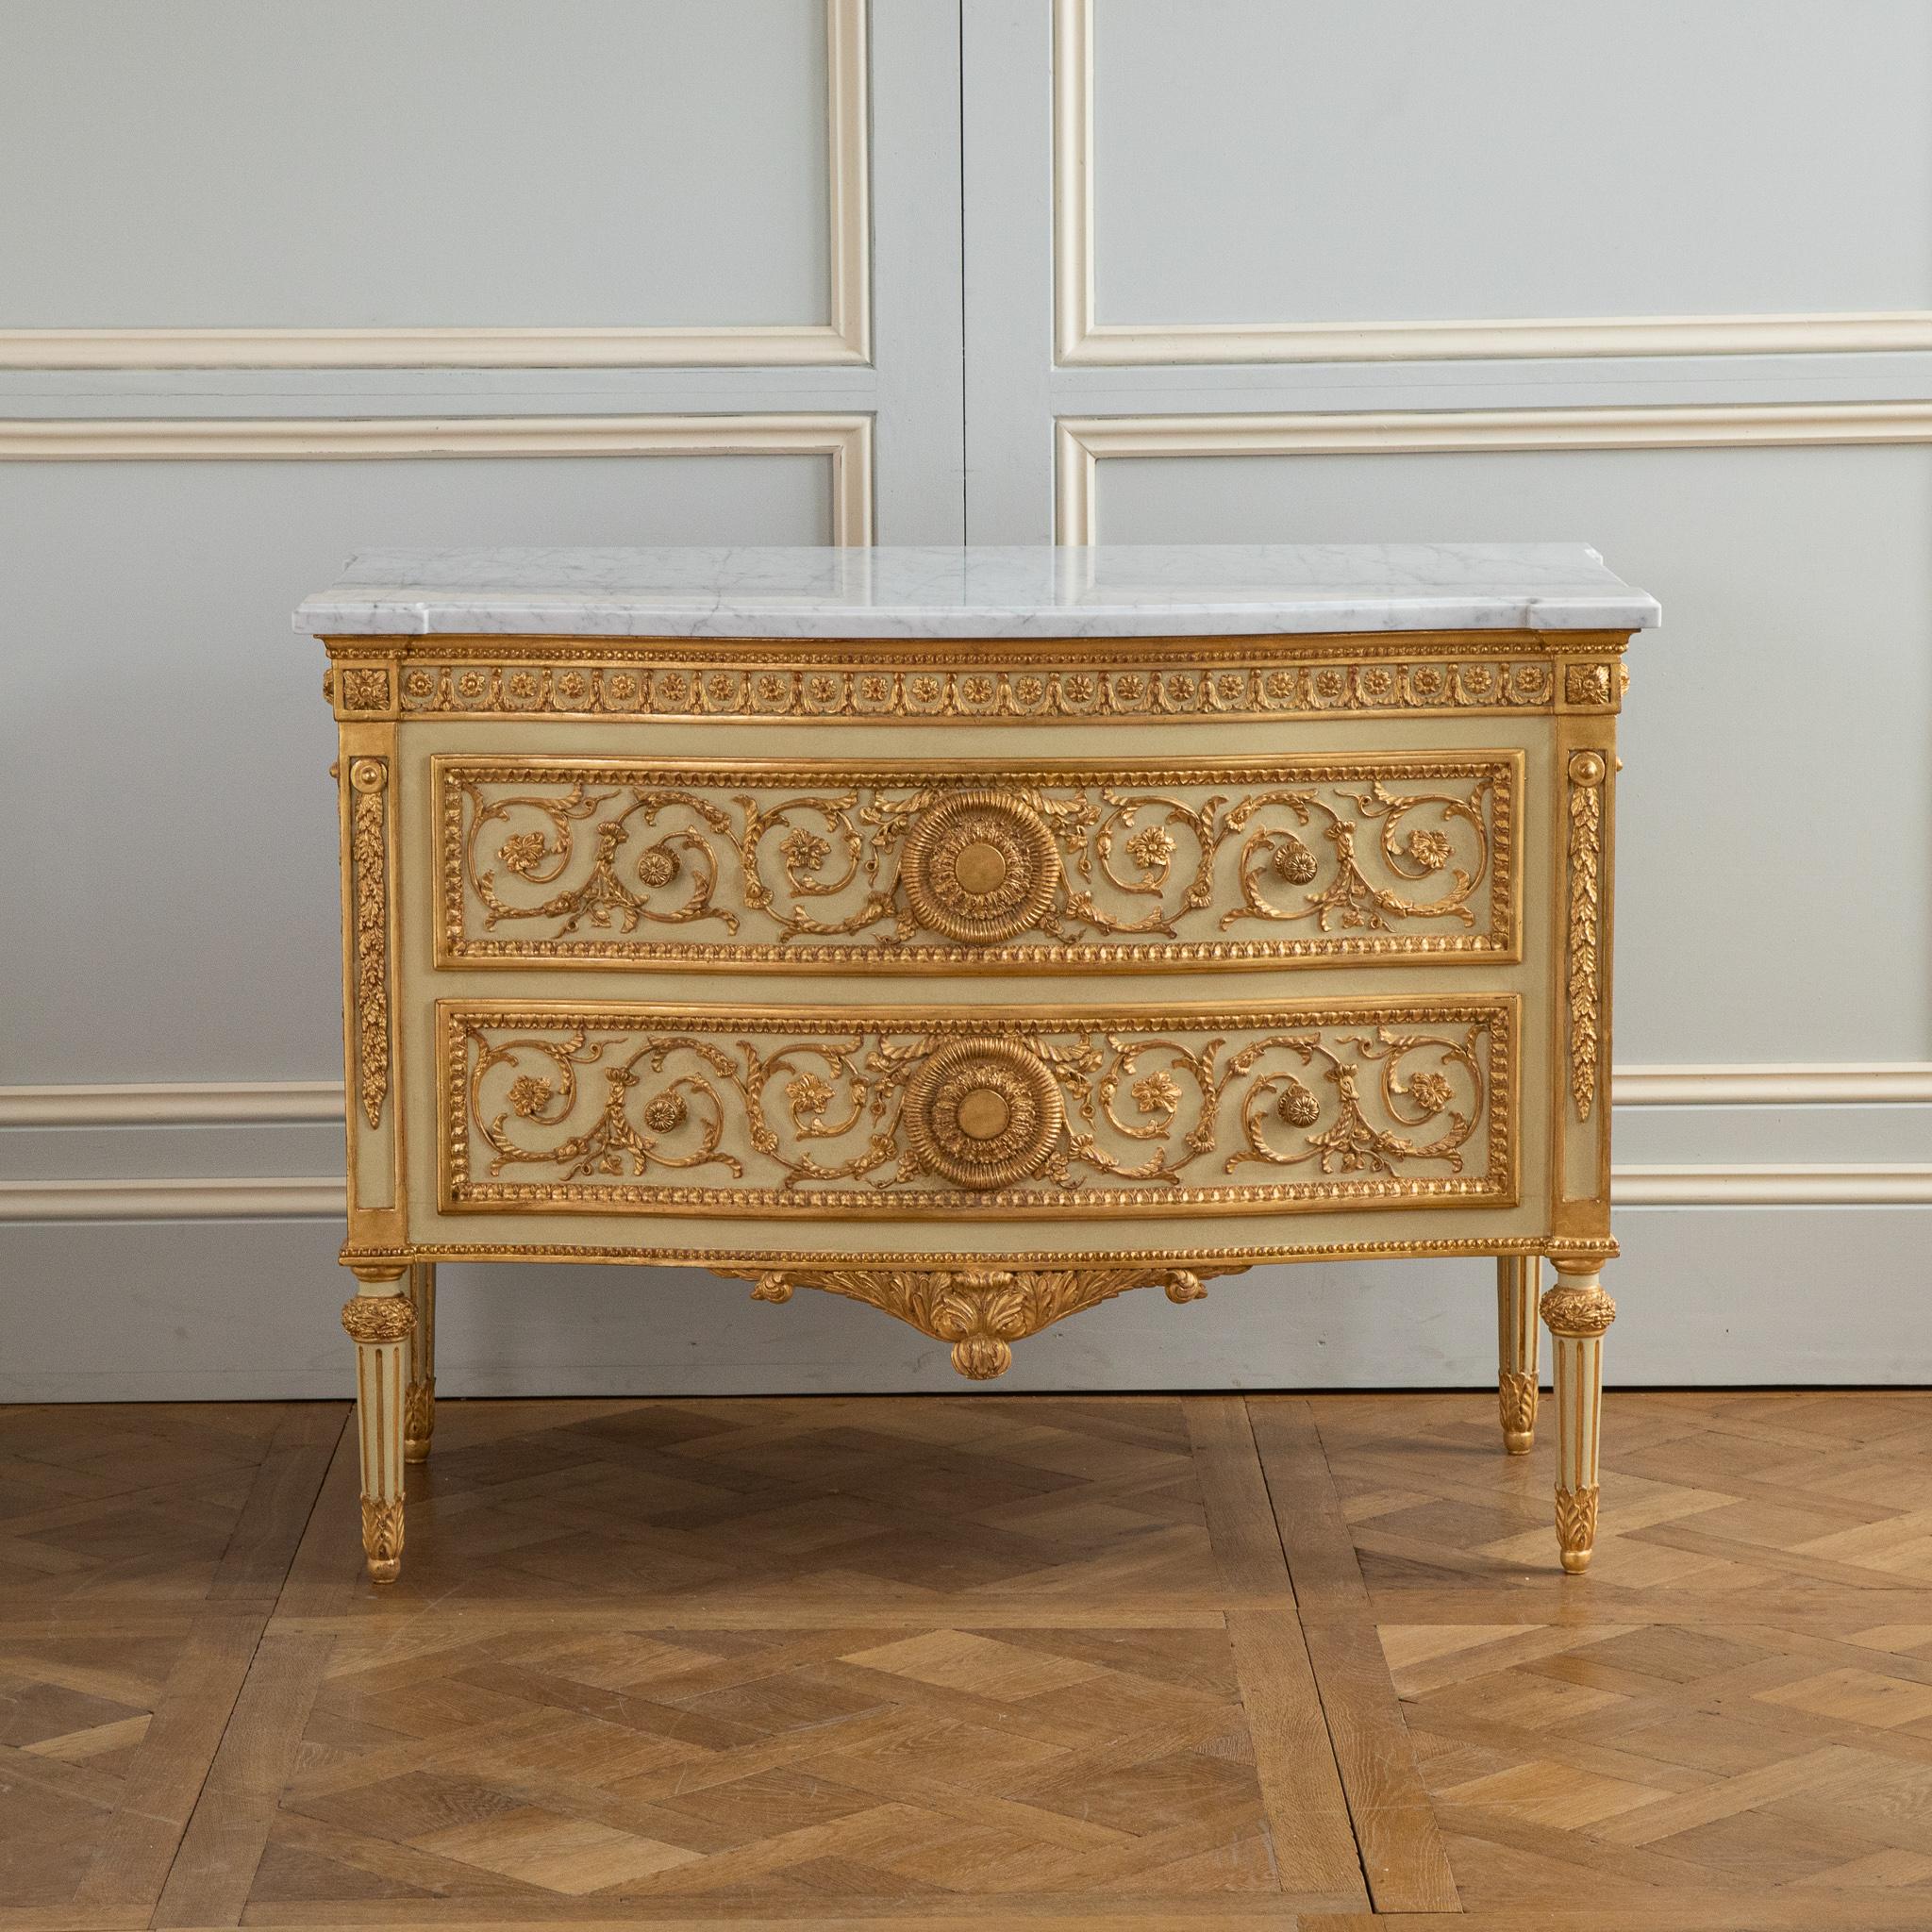 Hand carved and Hand finished Louis XVI style commode in polychrome finish.
Painted in a light French green with gold highlights.
with a 30mm Carrara Marble top
Fine details all around inspired by ancient Greece motifs.